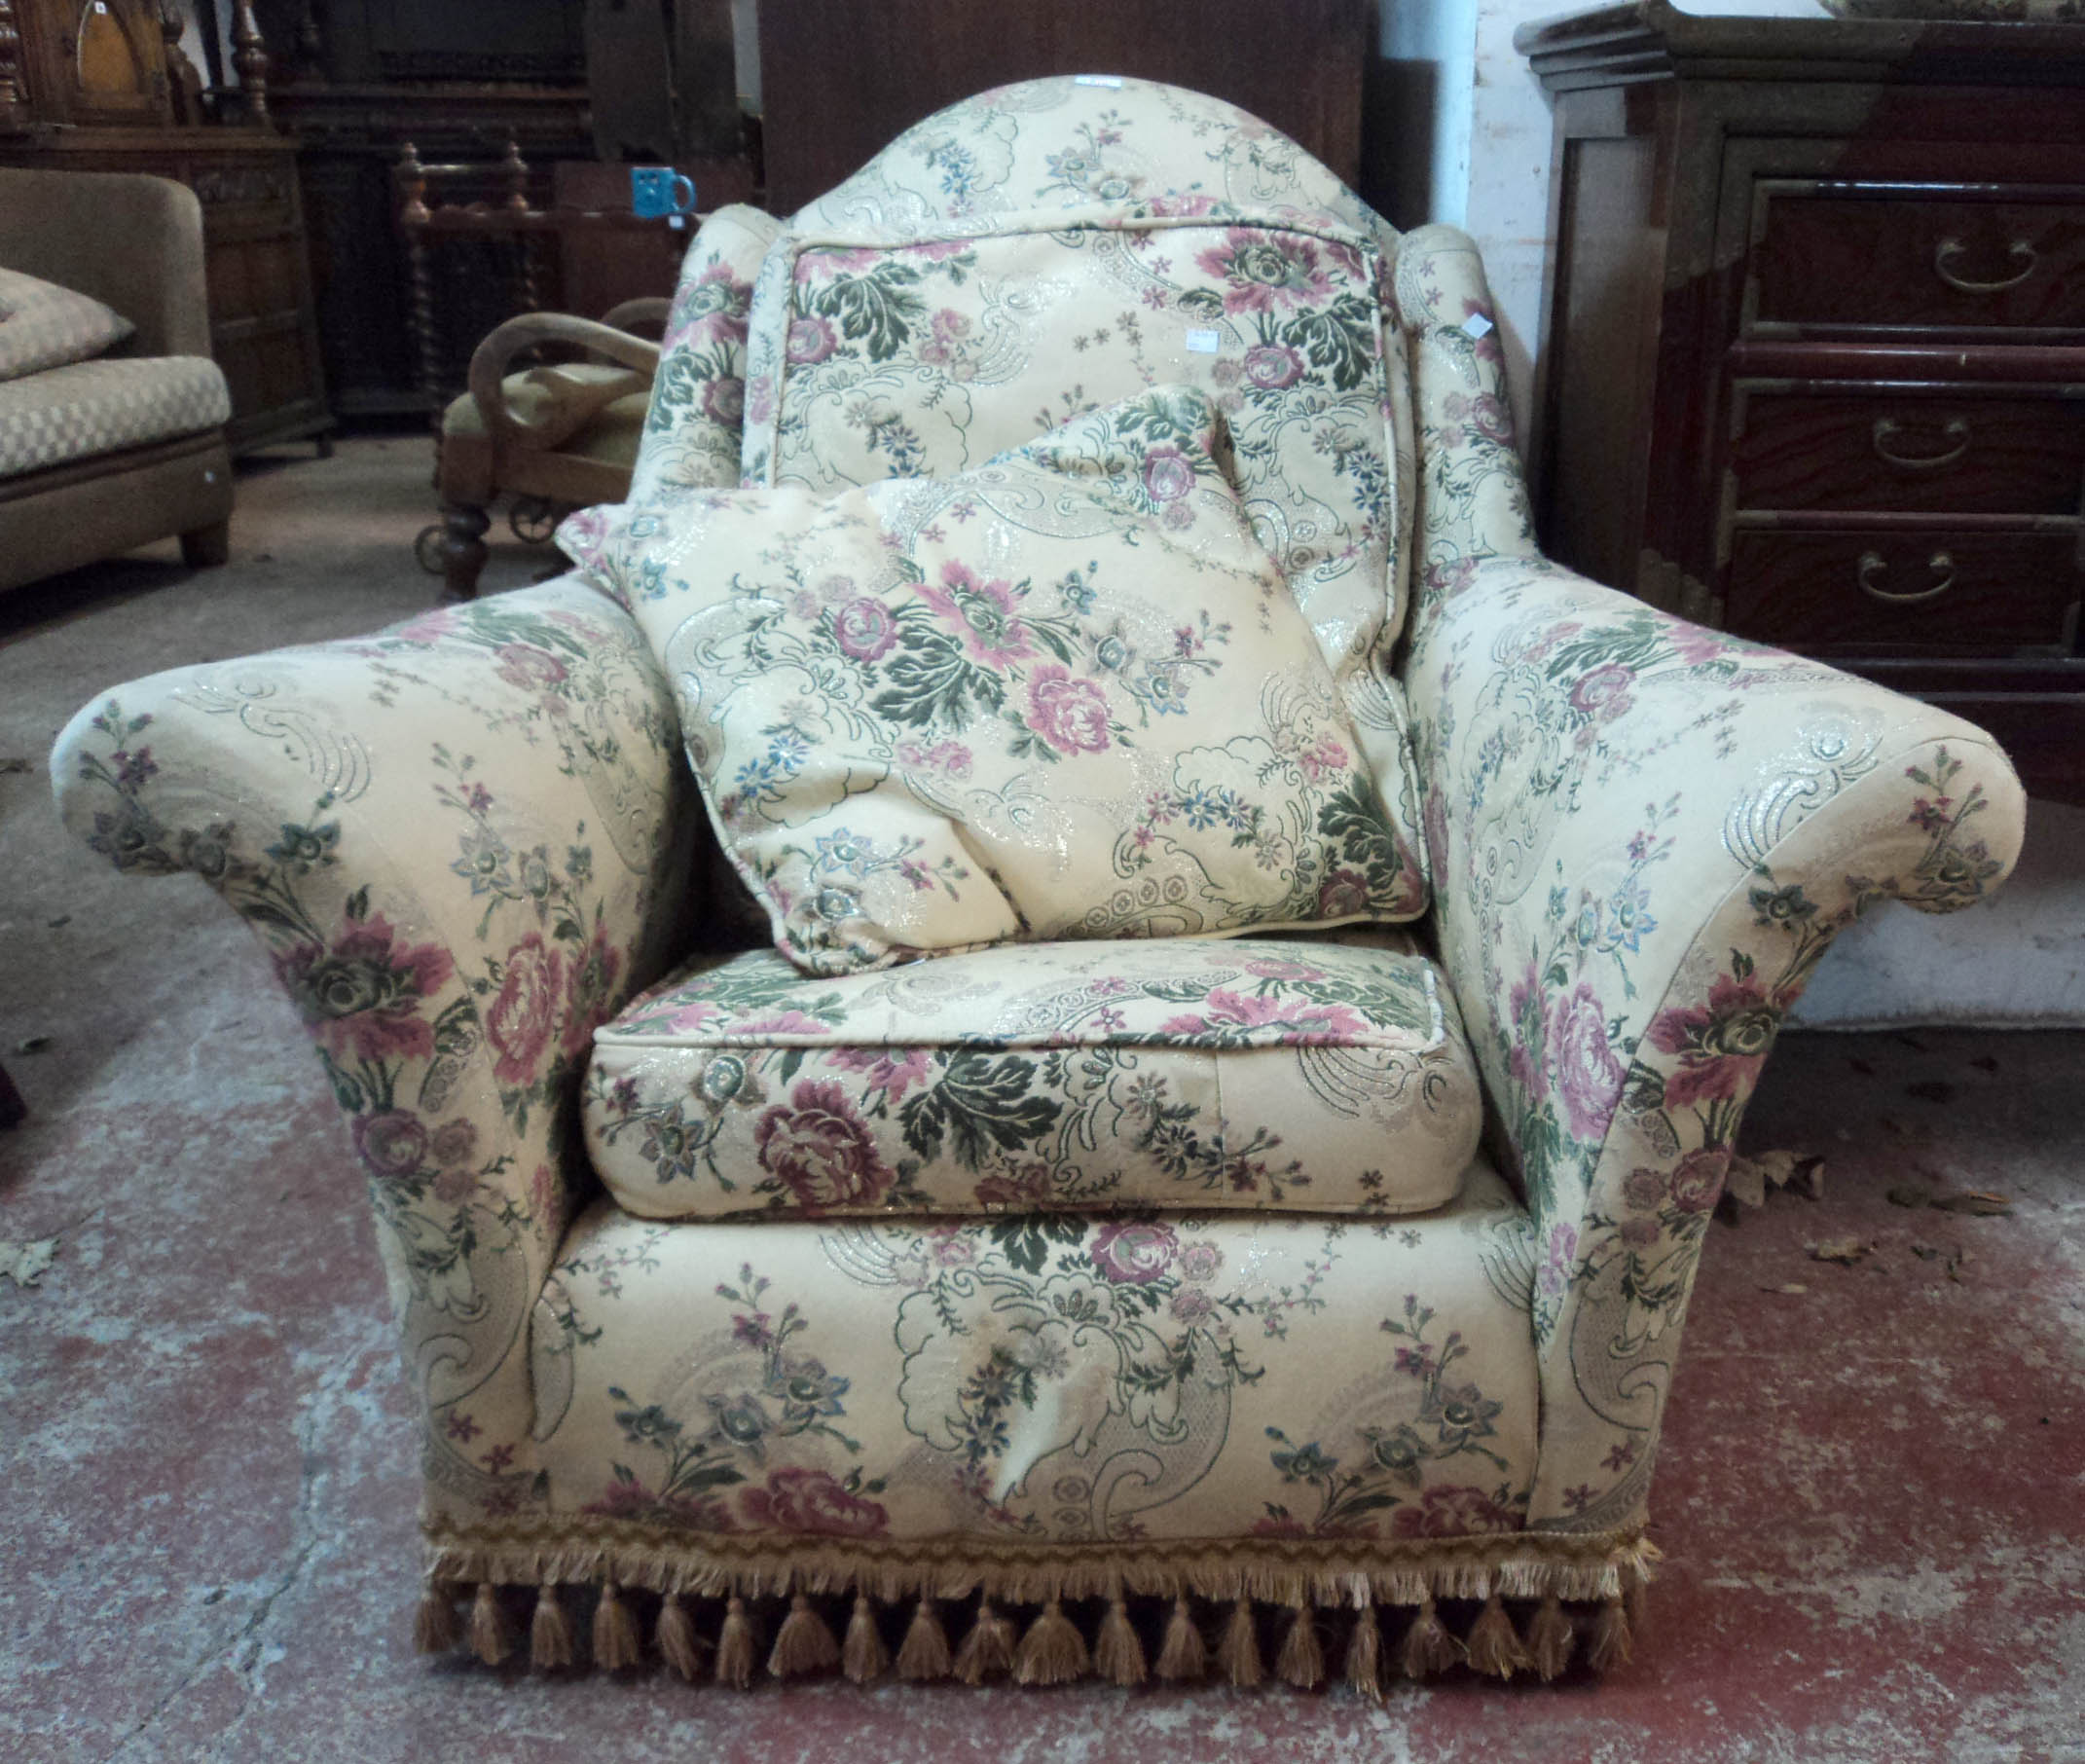 A 20th Century armchair with ornate gilt detailed floral upholstery, swept arms and tassel